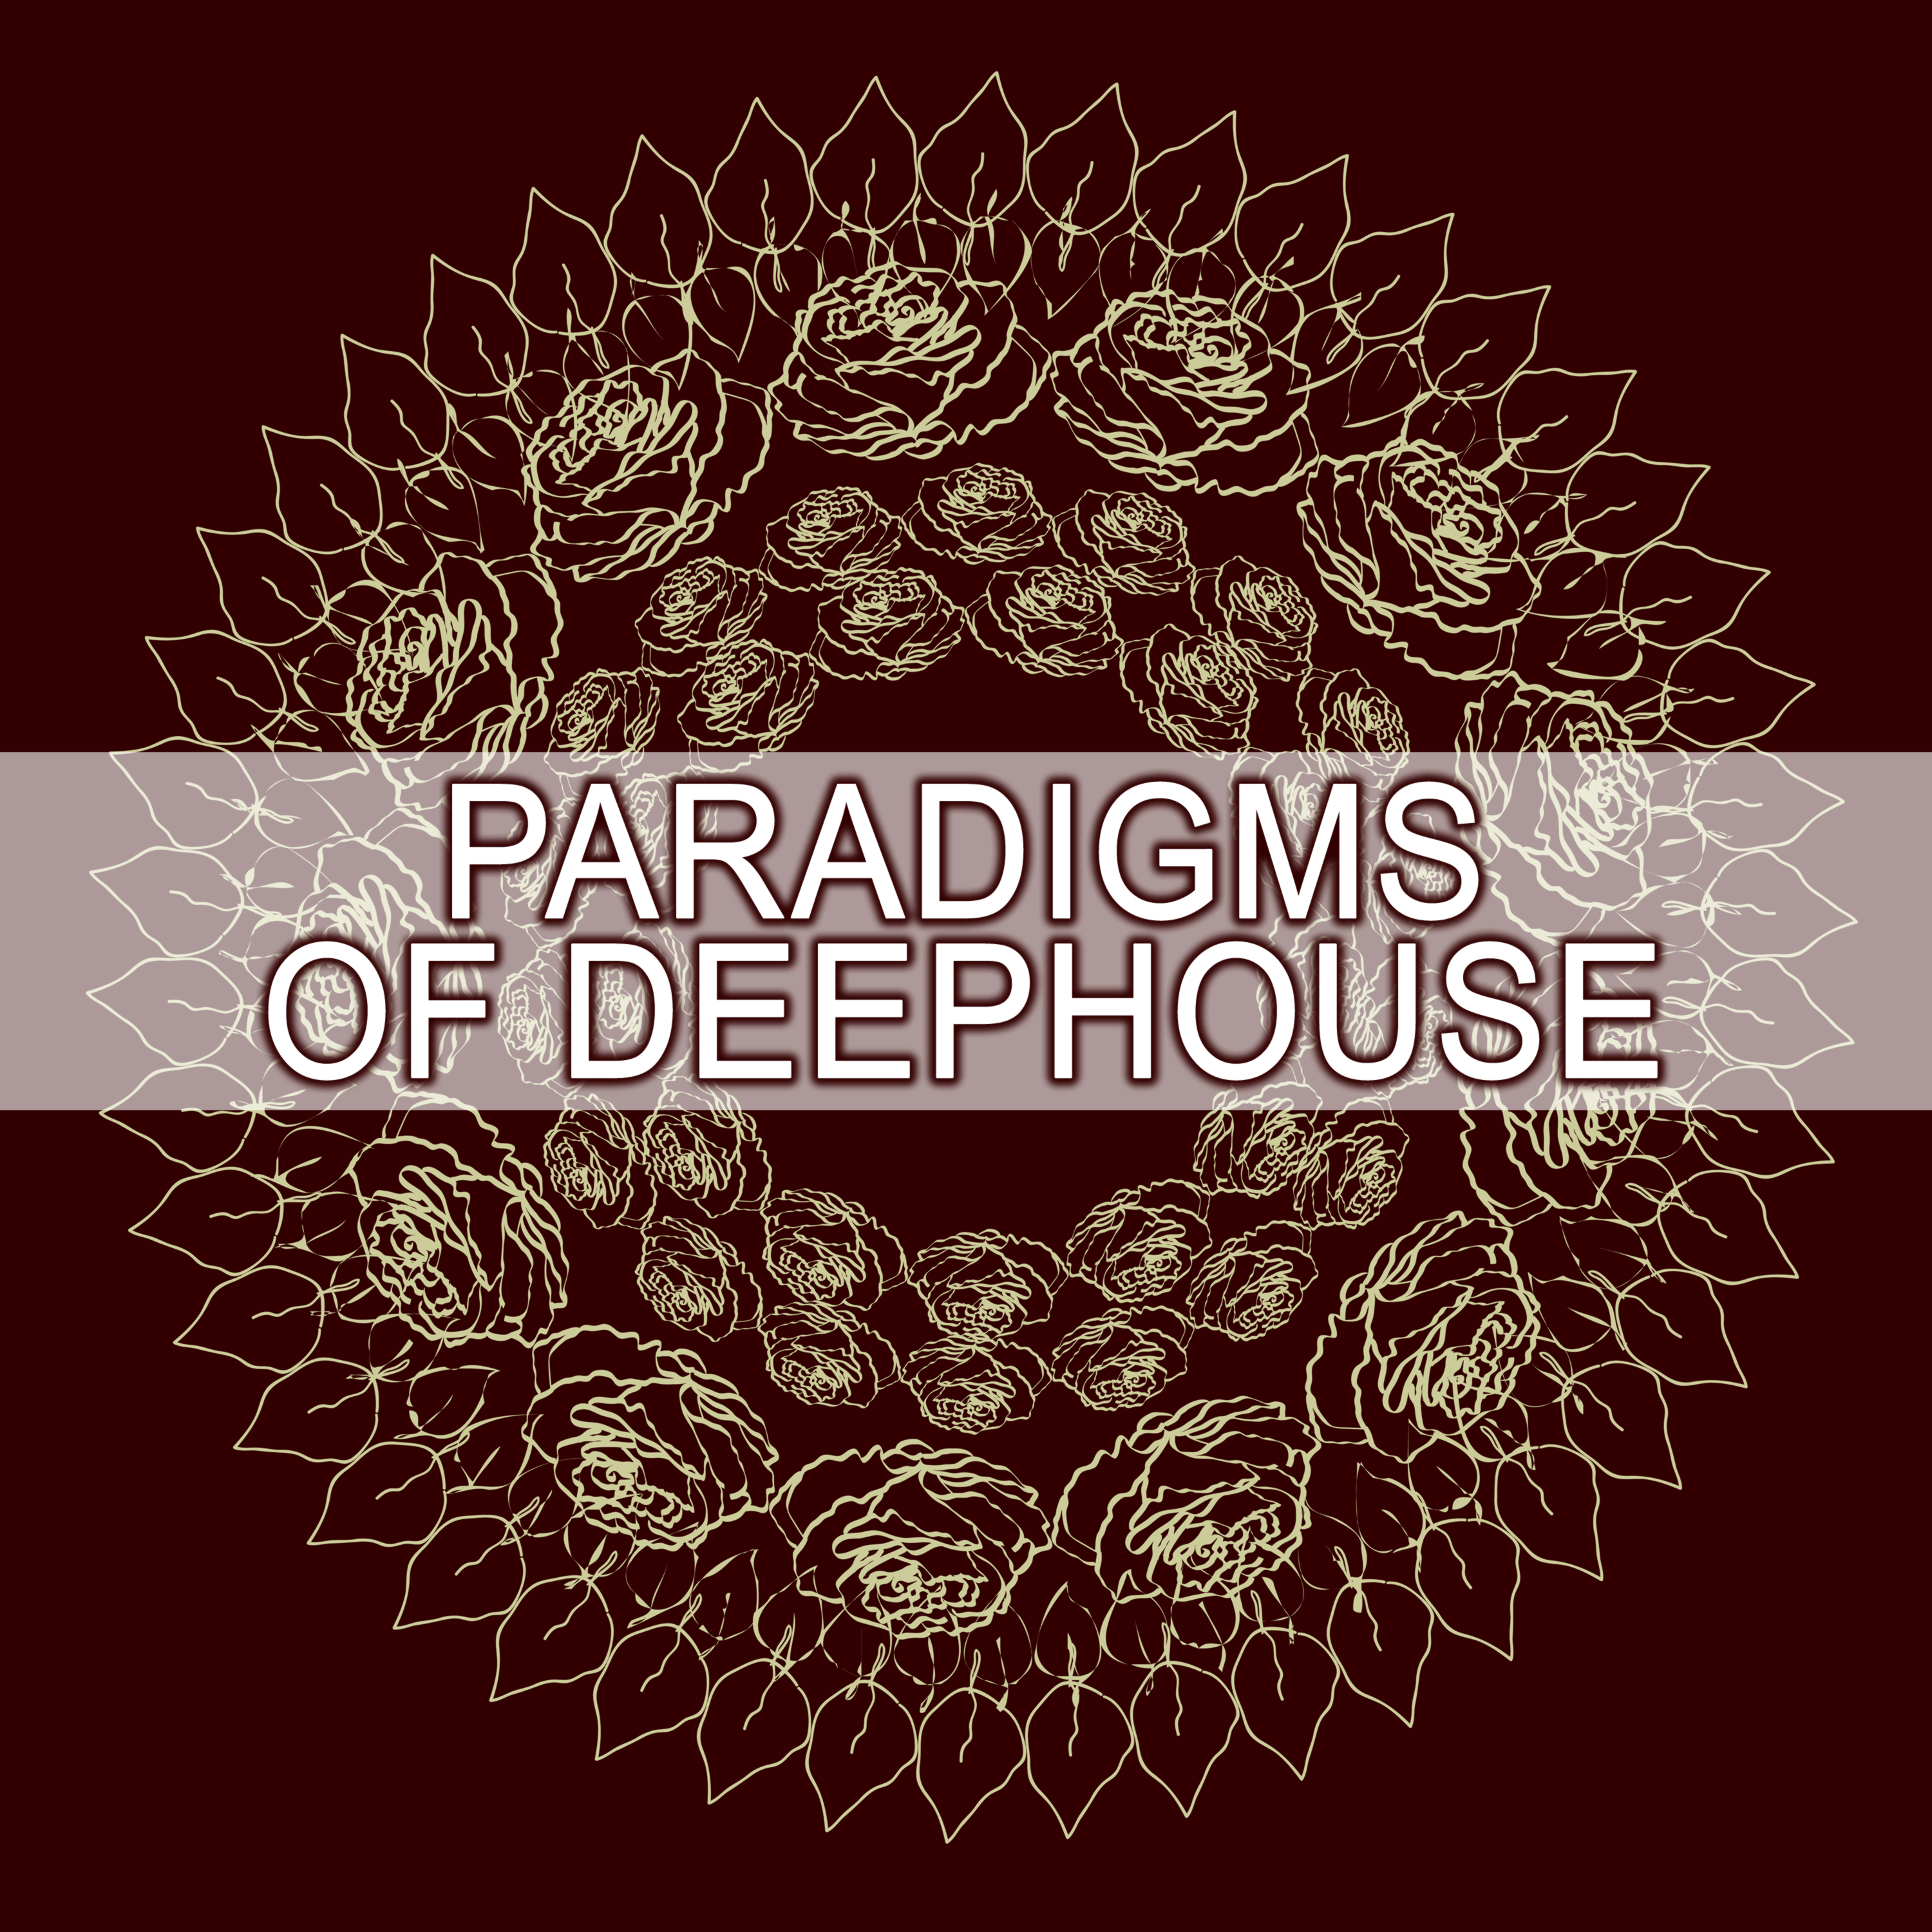 Paradigms of Deephouse